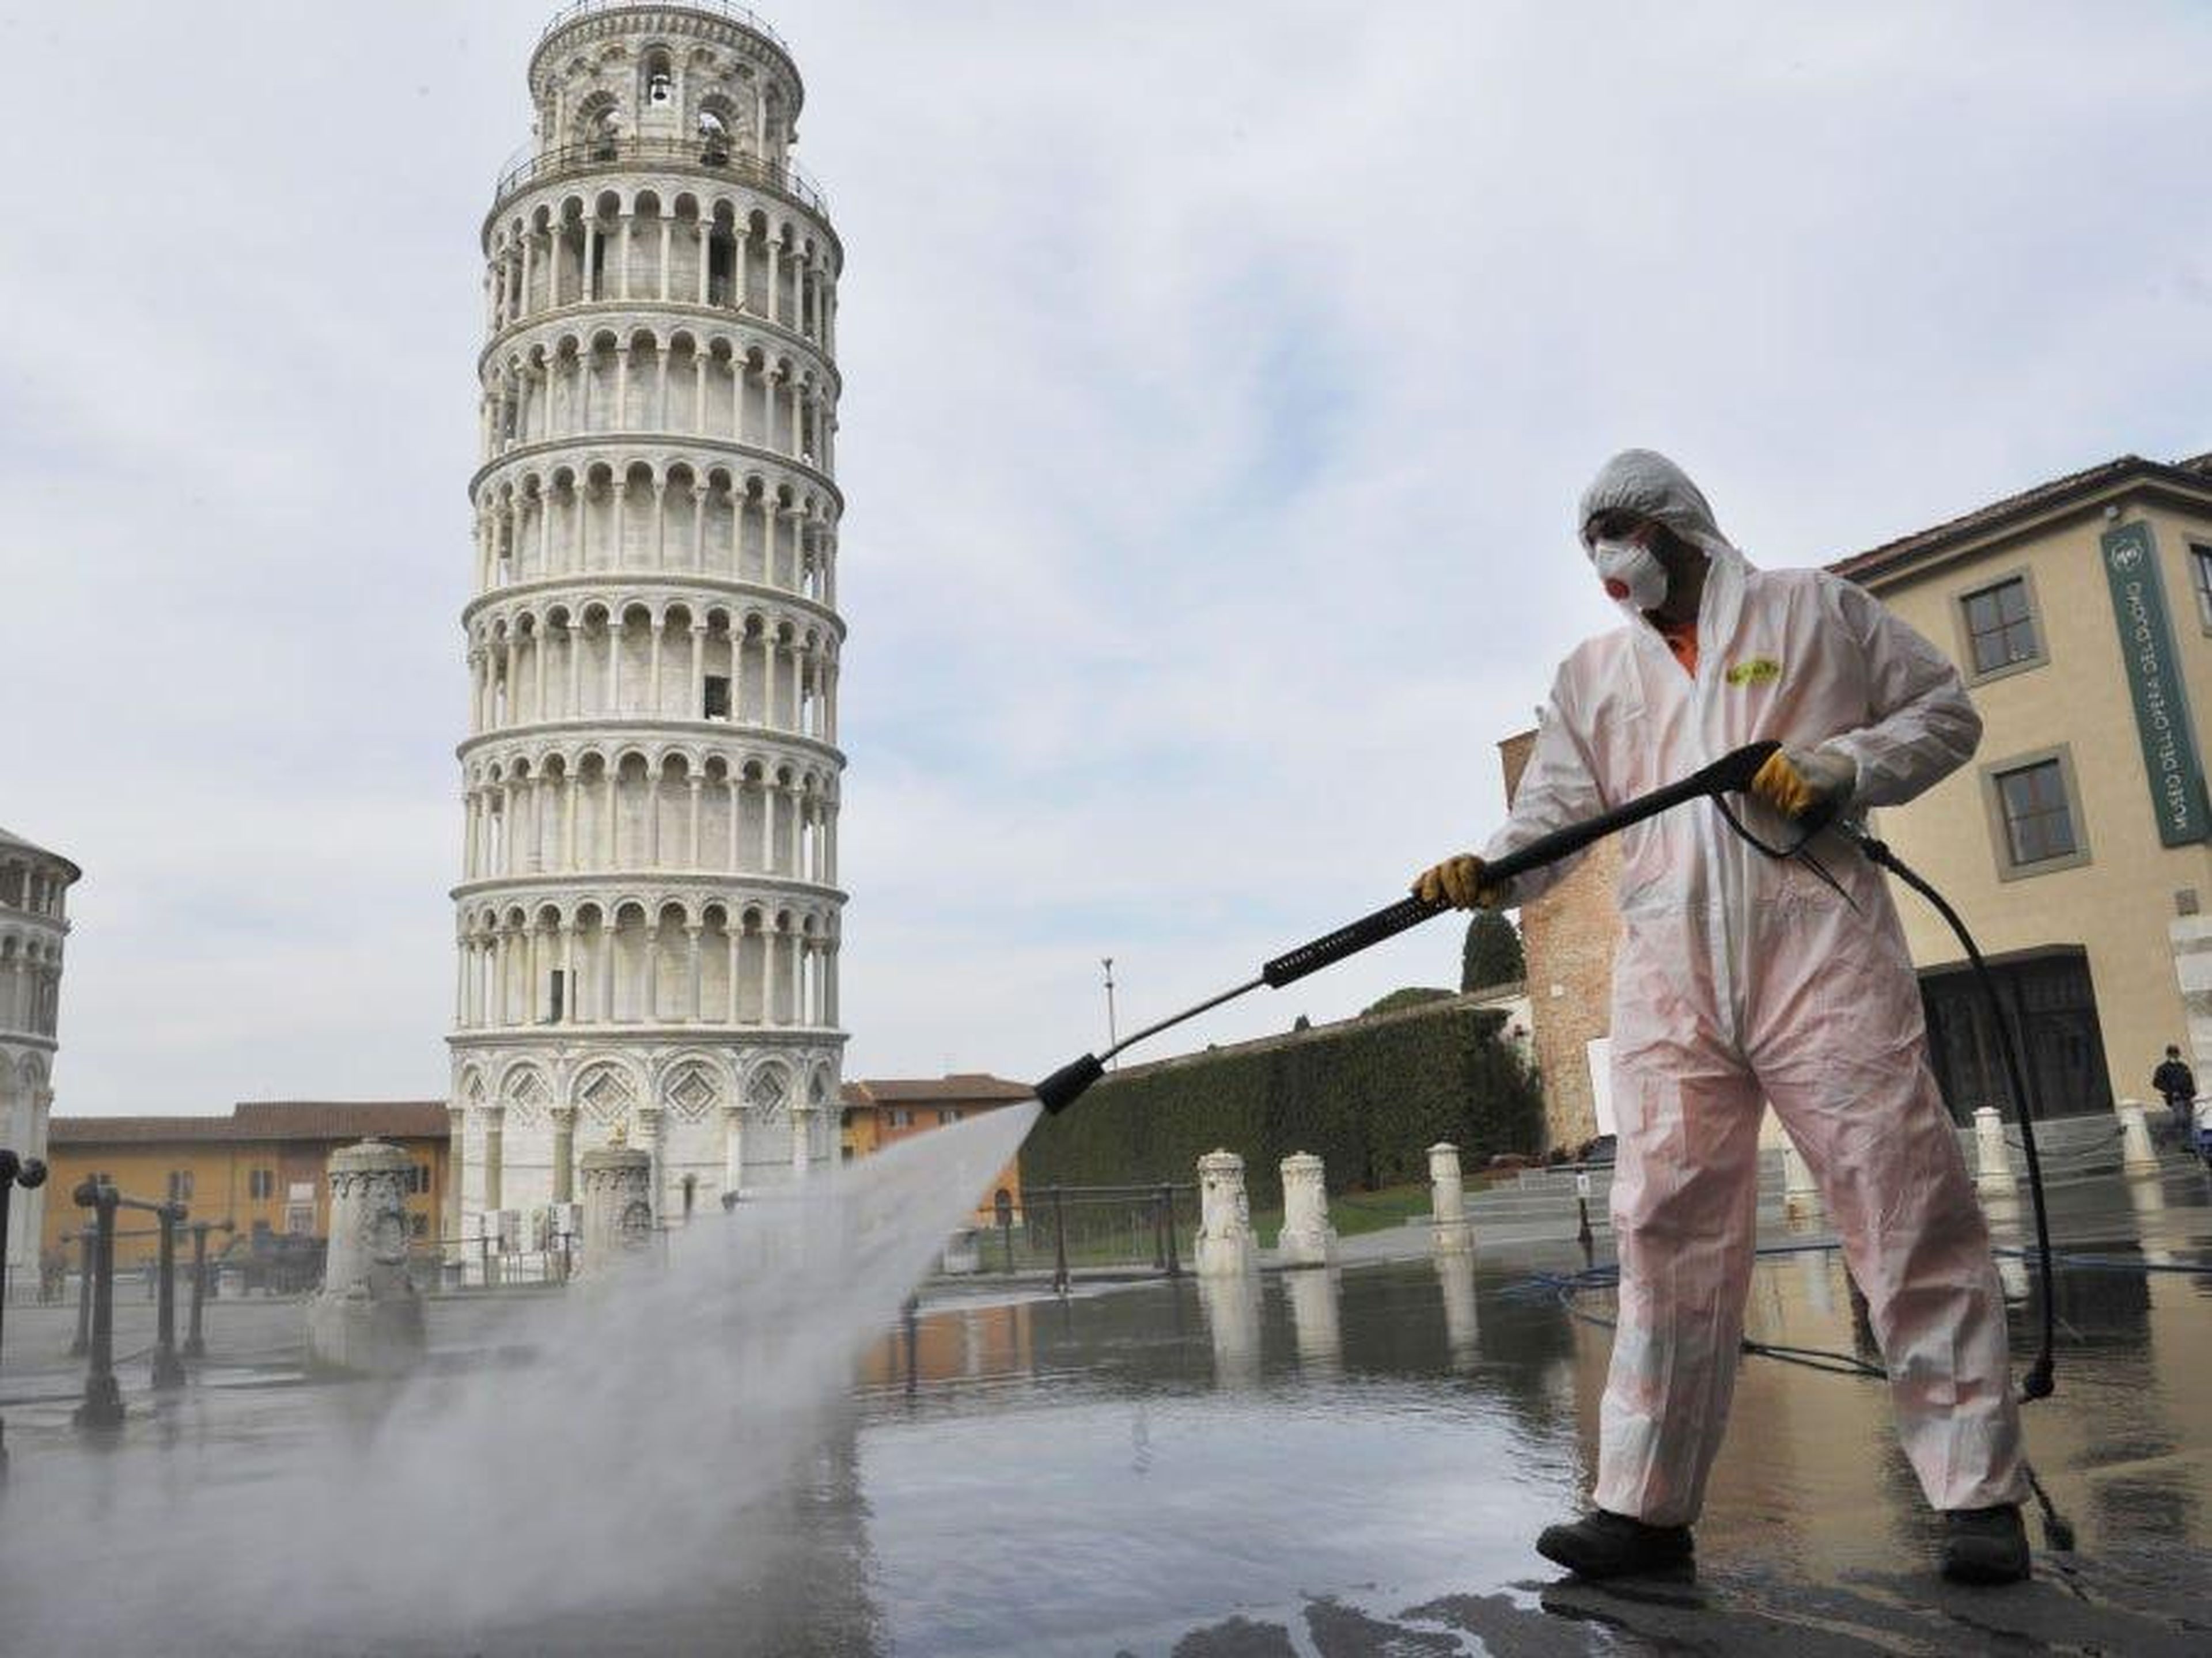 AFTER: The only people around the Leaning Tower during Italy's lockdown are workers spraying disinfectant solutions around public spaces.